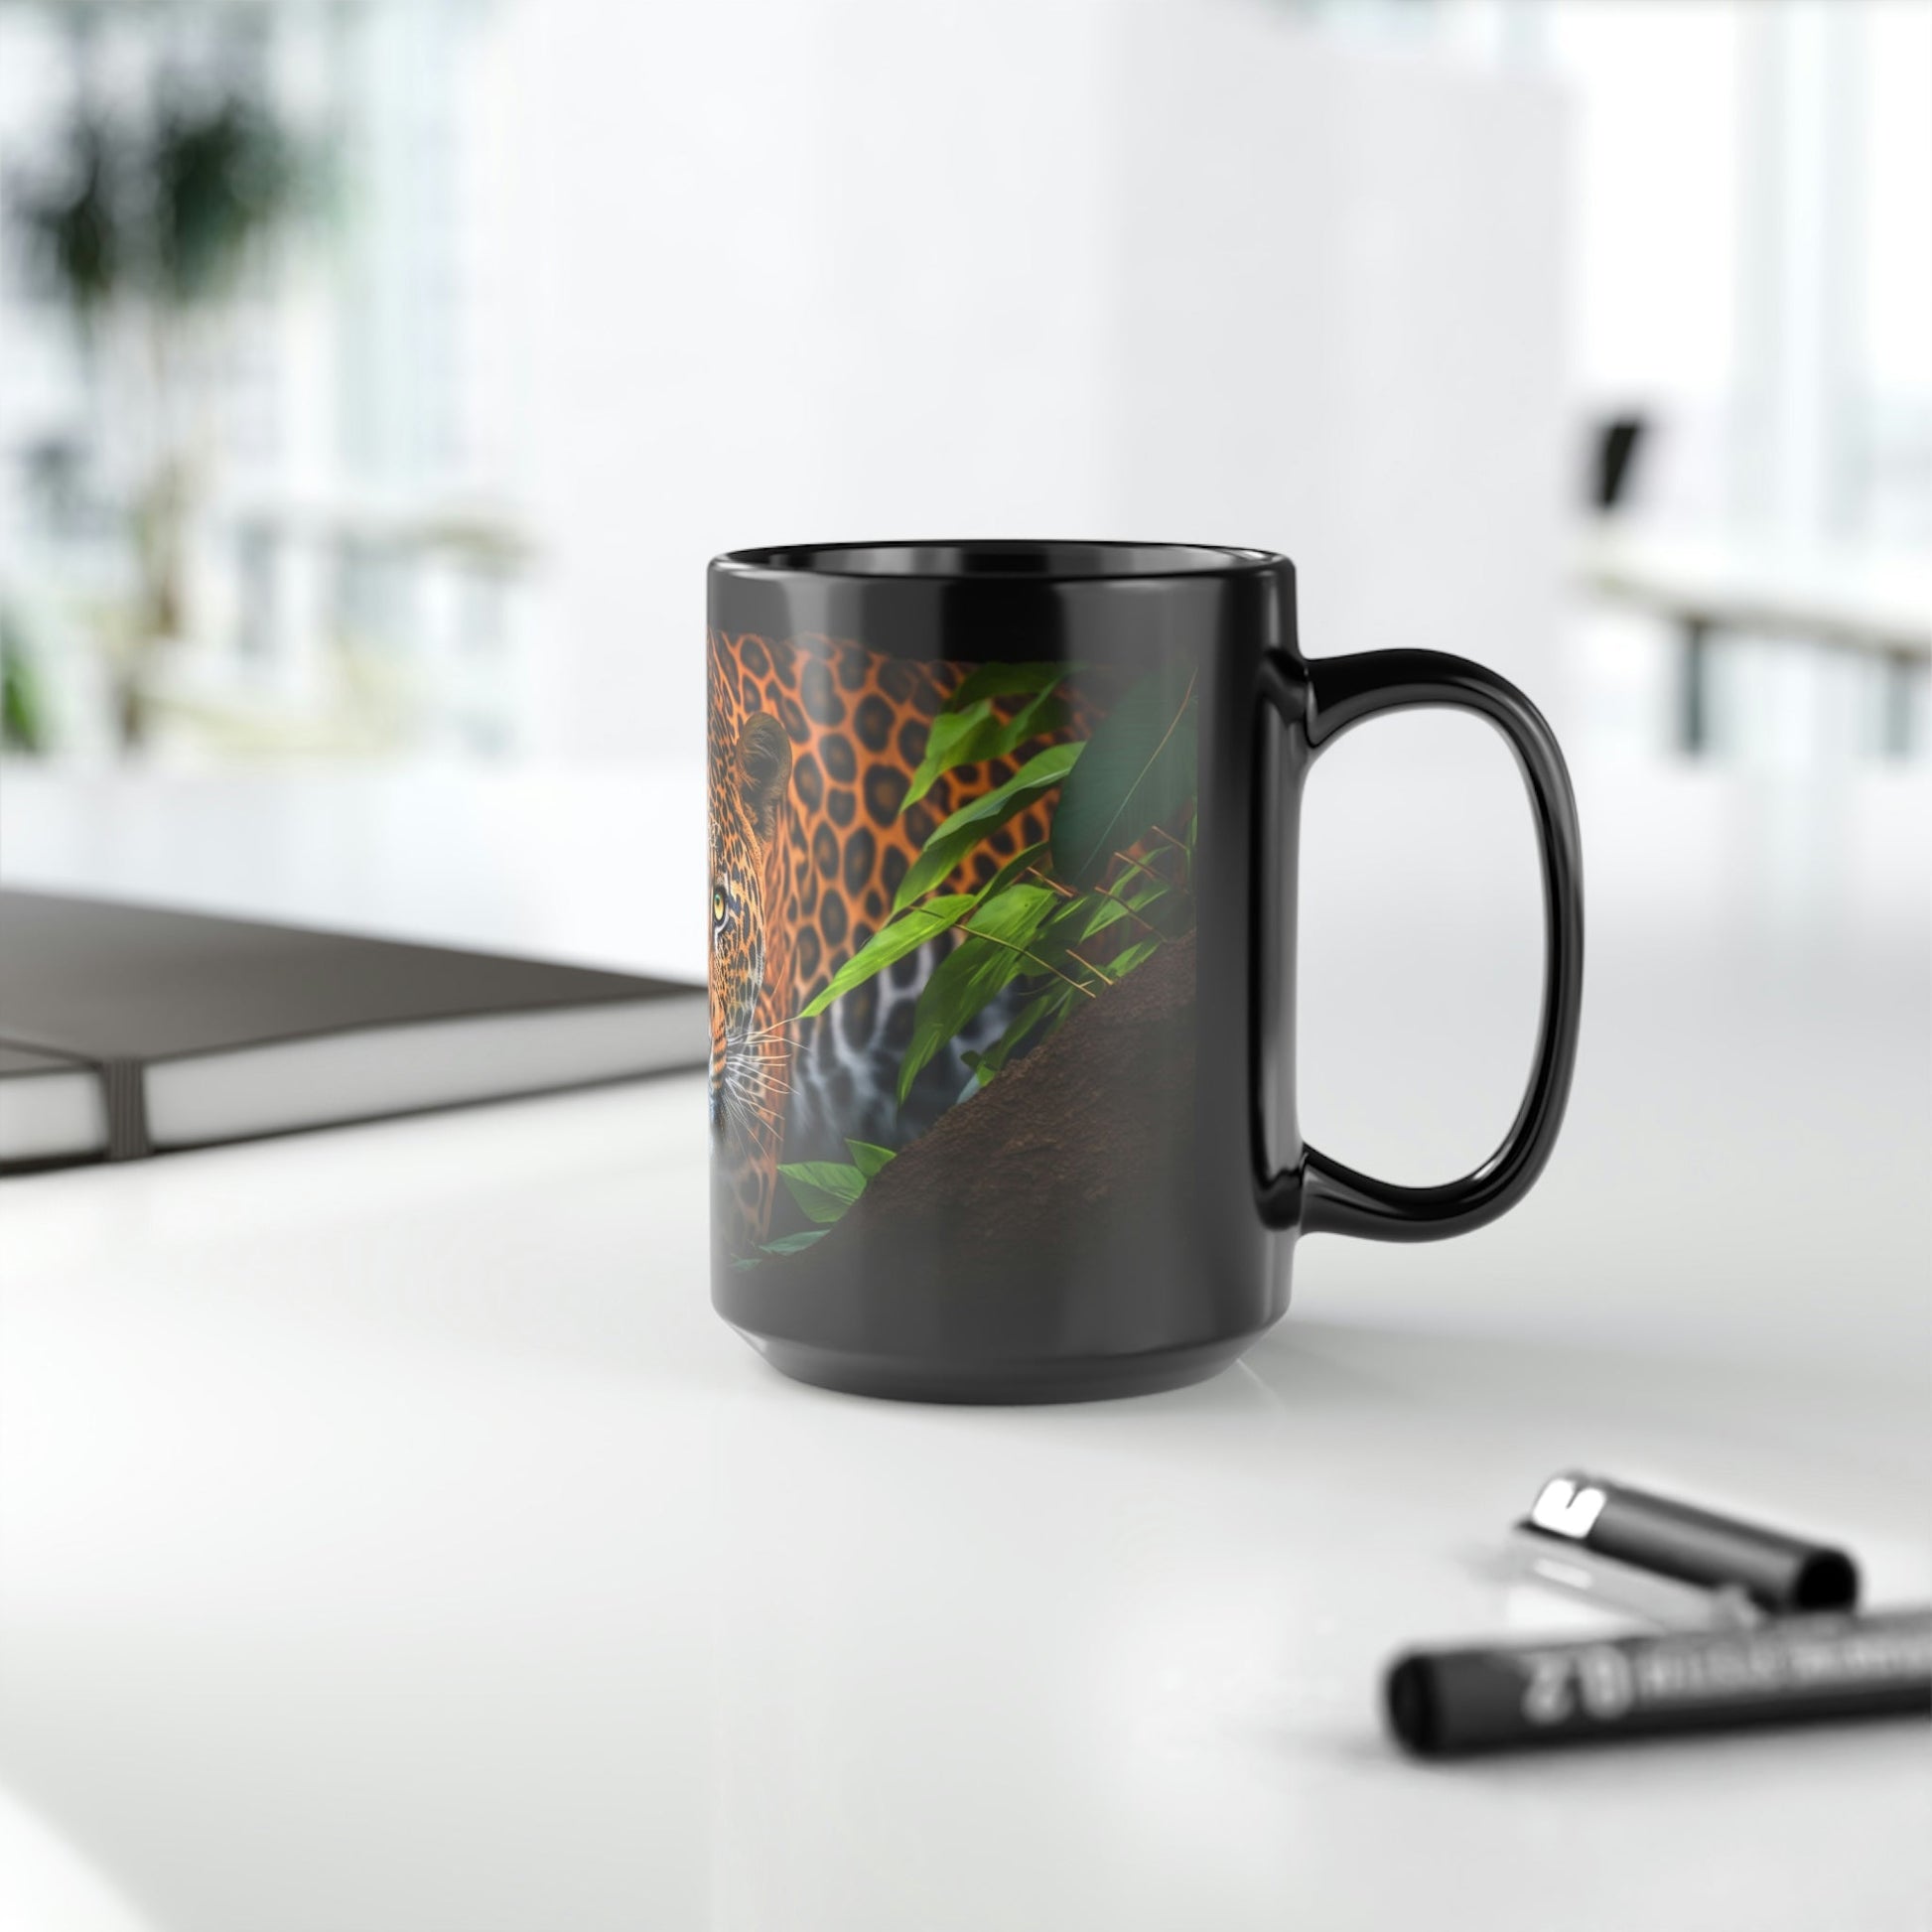 Jauguar About to Pounce in Jungle - 15 oz Coffee Mug